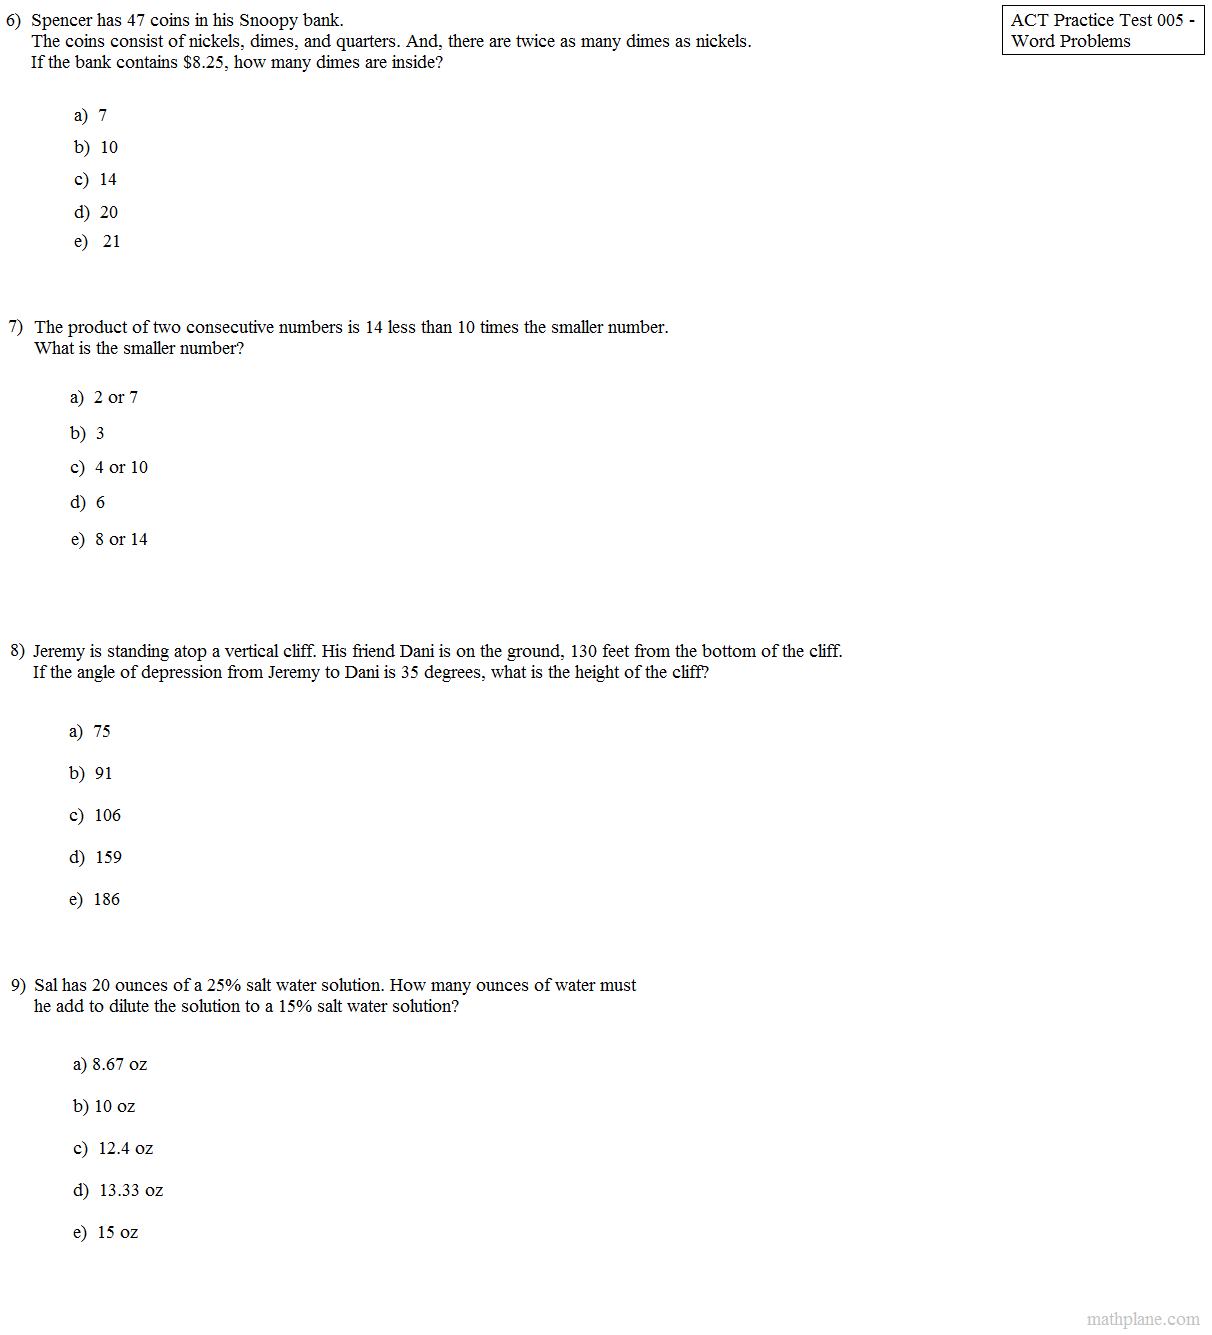 Math Plane  Act Practice Test 5  Word Problems